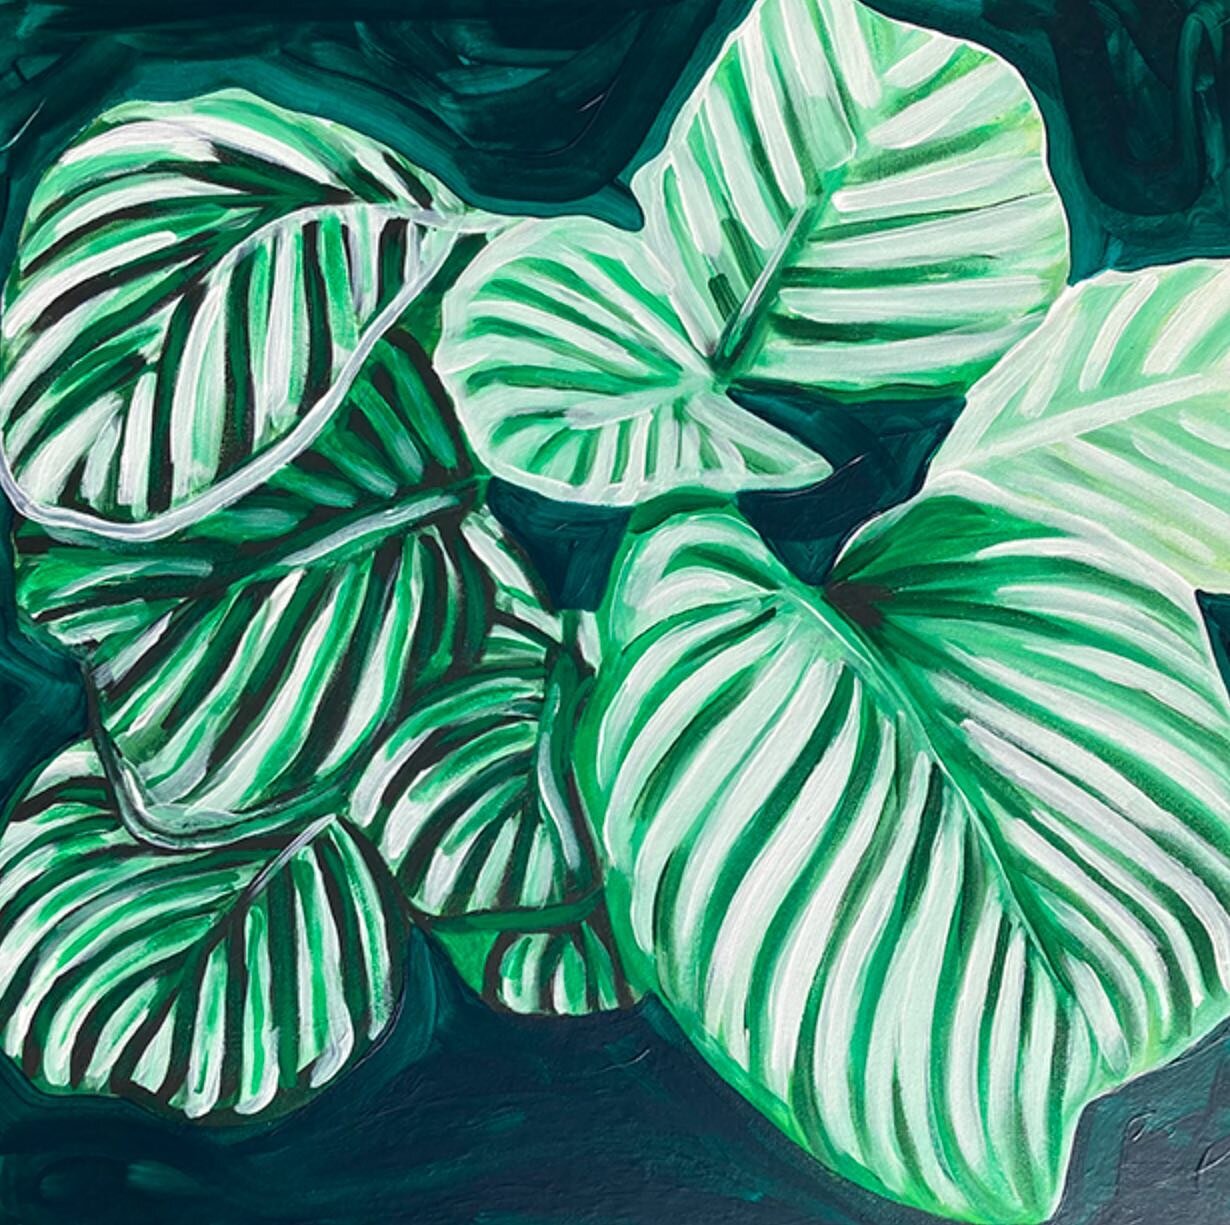 Happy Saturday! Today we&rsquo;re sharing &lsquo;Calathea&rsquo; @annie_pritchard_art ✨Now available under - Autumn exhibition in our online store 😍 

@annie_pritchard_art is an incredibly talented acrylic artist from Canberra! Annie&rsquo;s vibrant